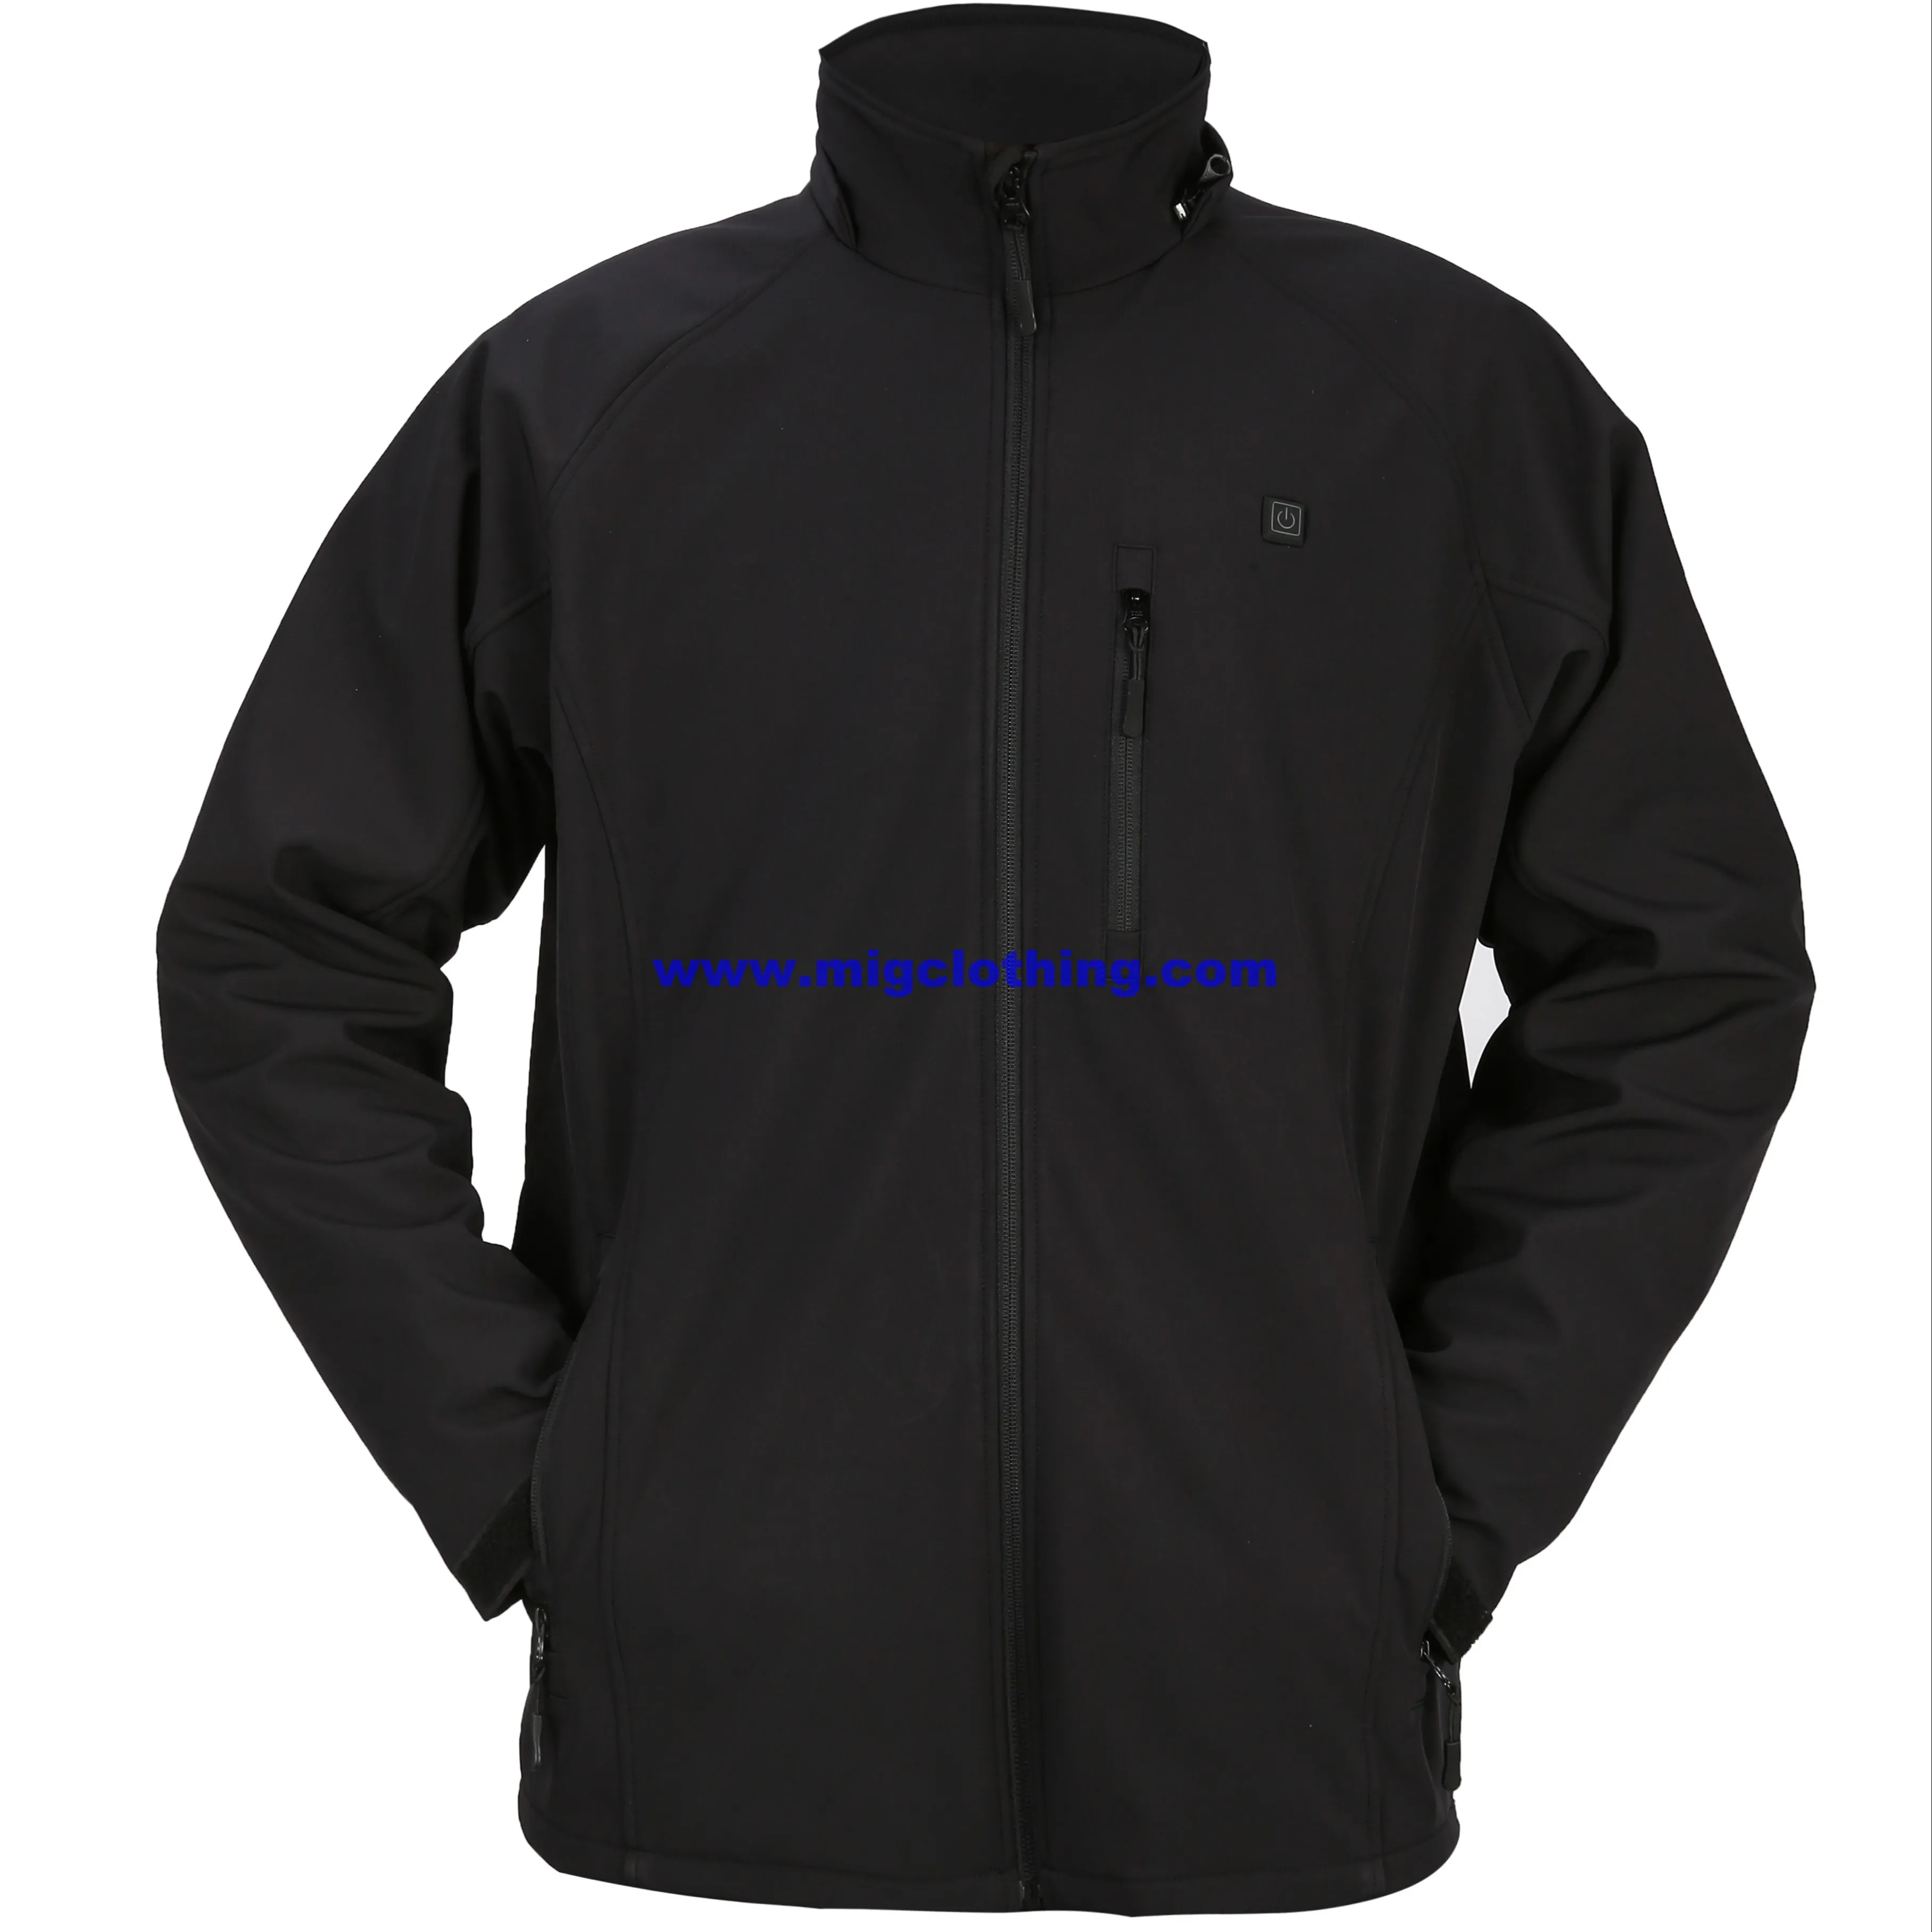 Man   Women Heated Clothing with Rechargeable Li Battery electrical heated jacket Heated Coat for Skiing Motorcycling